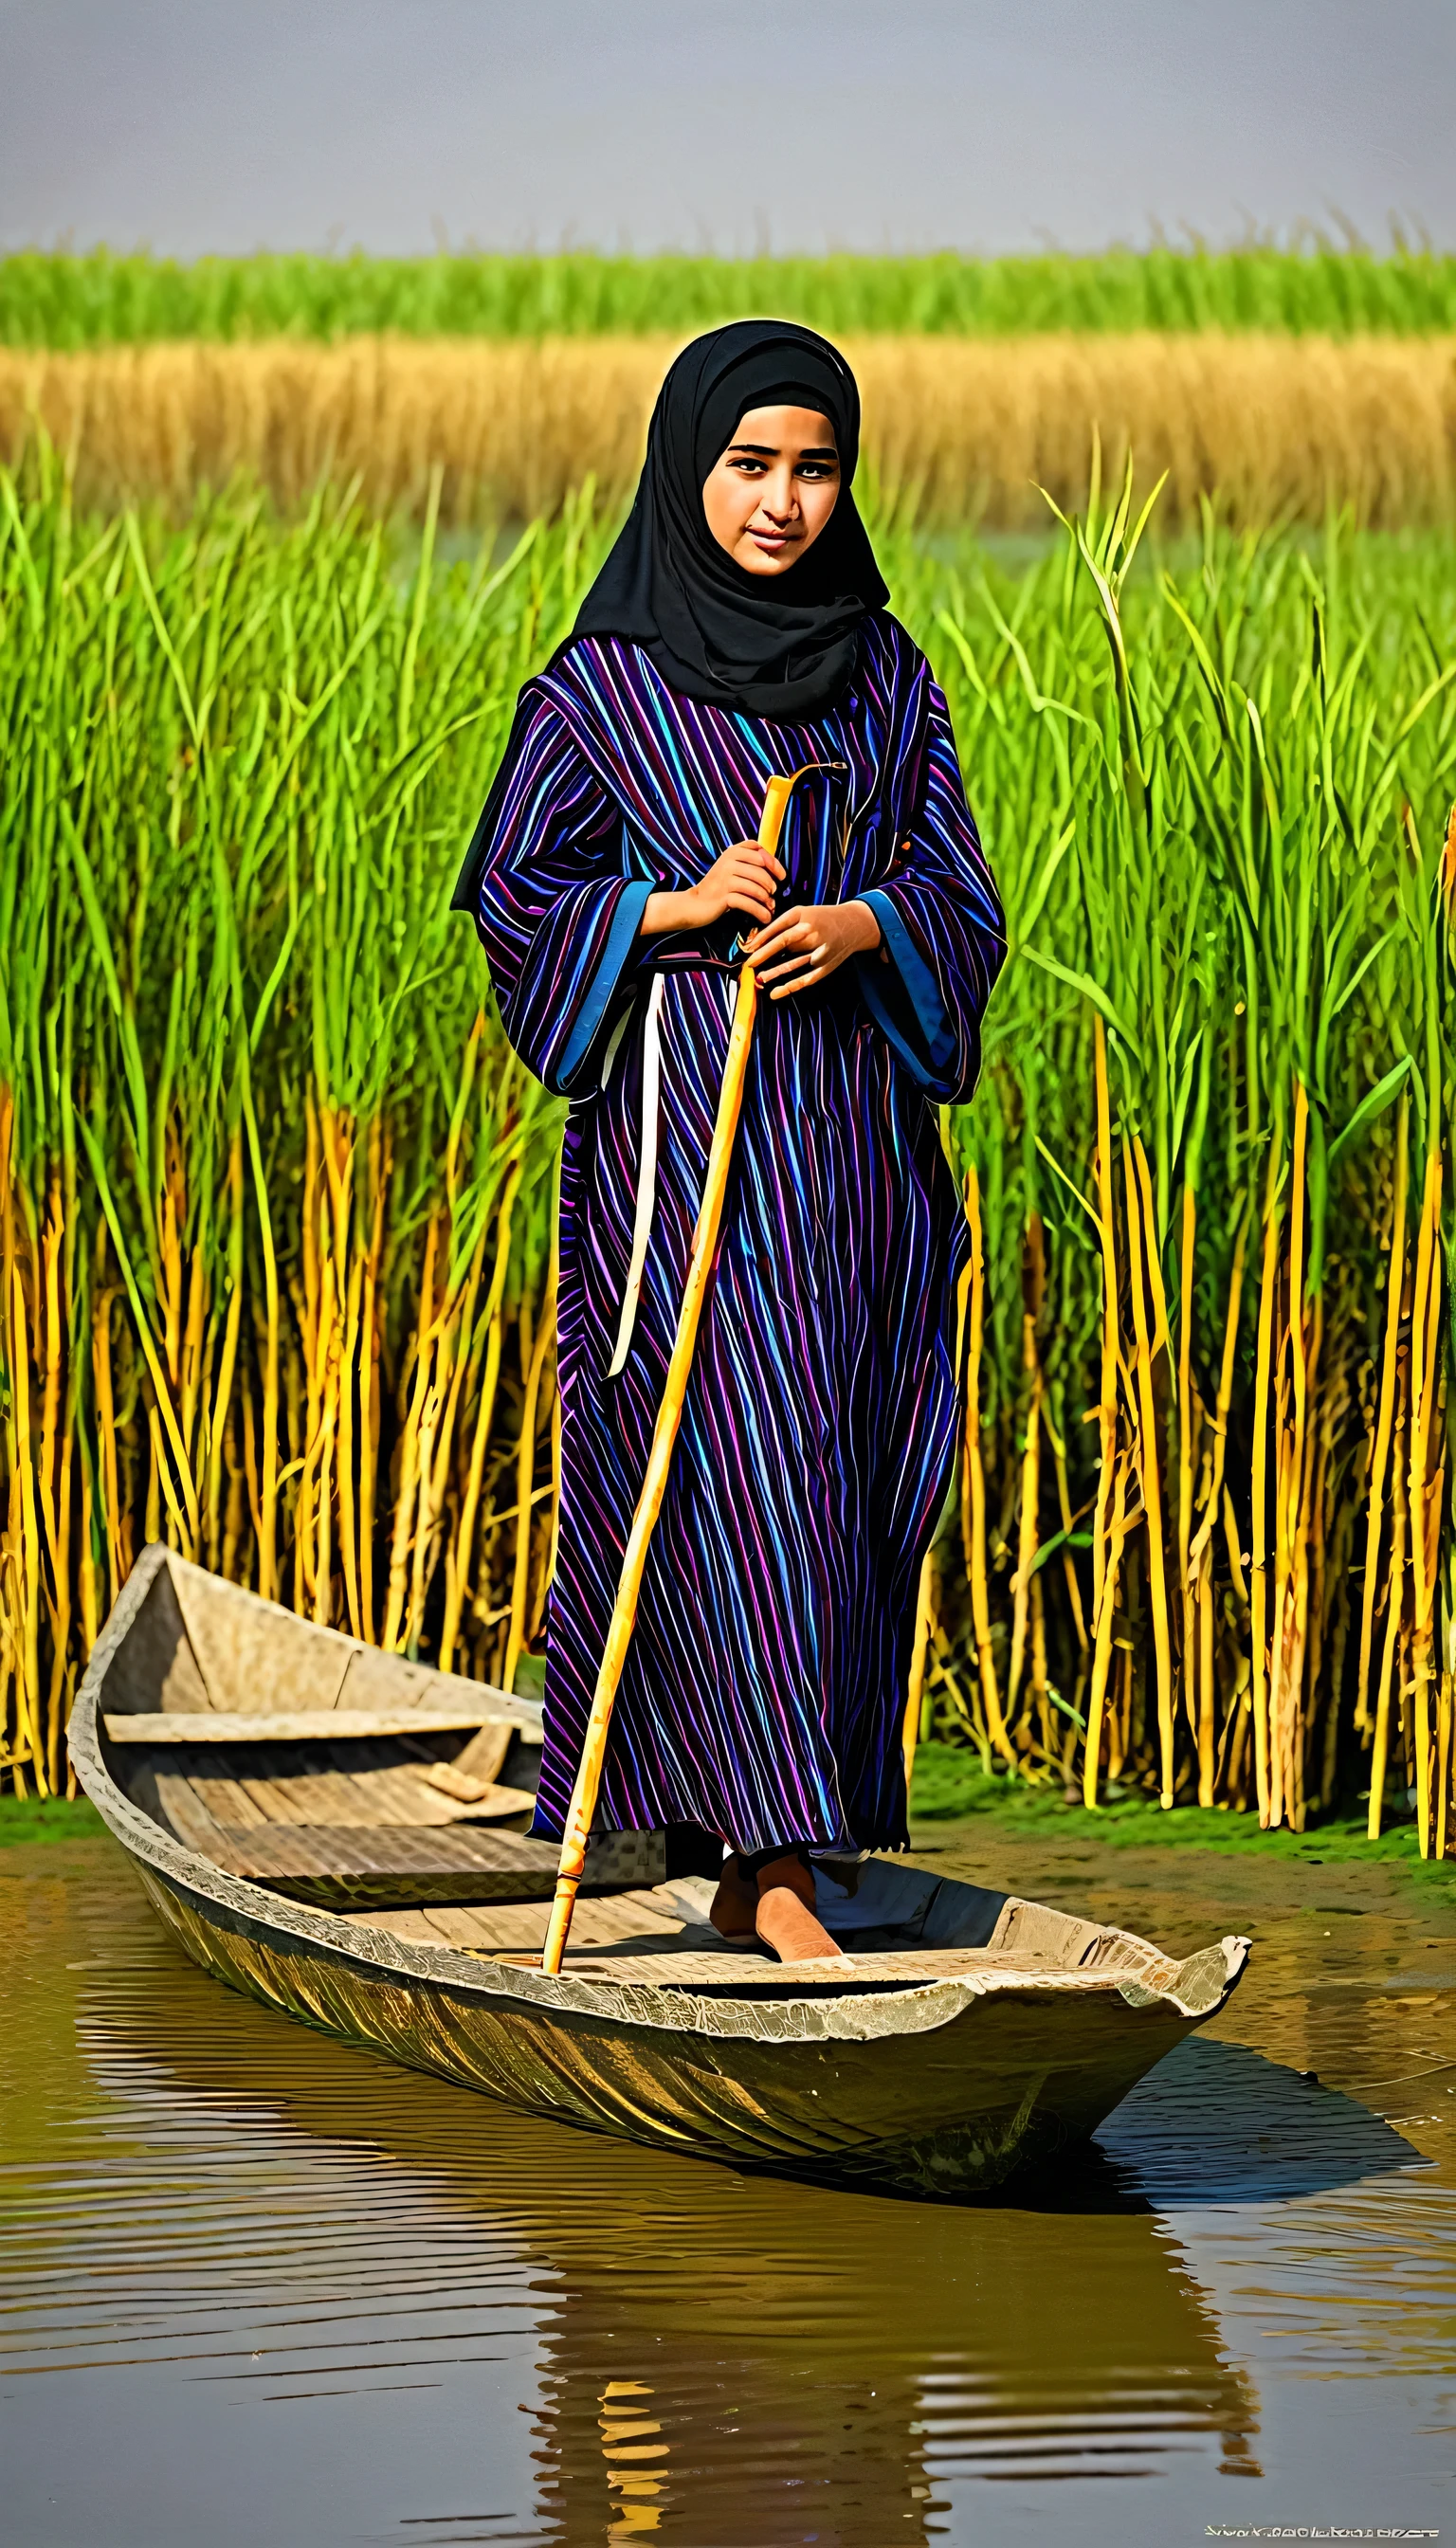 Iraqi a girl wearing a traditional robe in a boat and holding a stick in a swamp, Southern Iraq, marshes, traditional boat, the surroundings include grass and reeds and plants, solo, black_hair, 1girl, girl_focus, hijab, grass, realistic, holding, outdoors, standing, photo realistic, best quality, realistic, photo-realistic